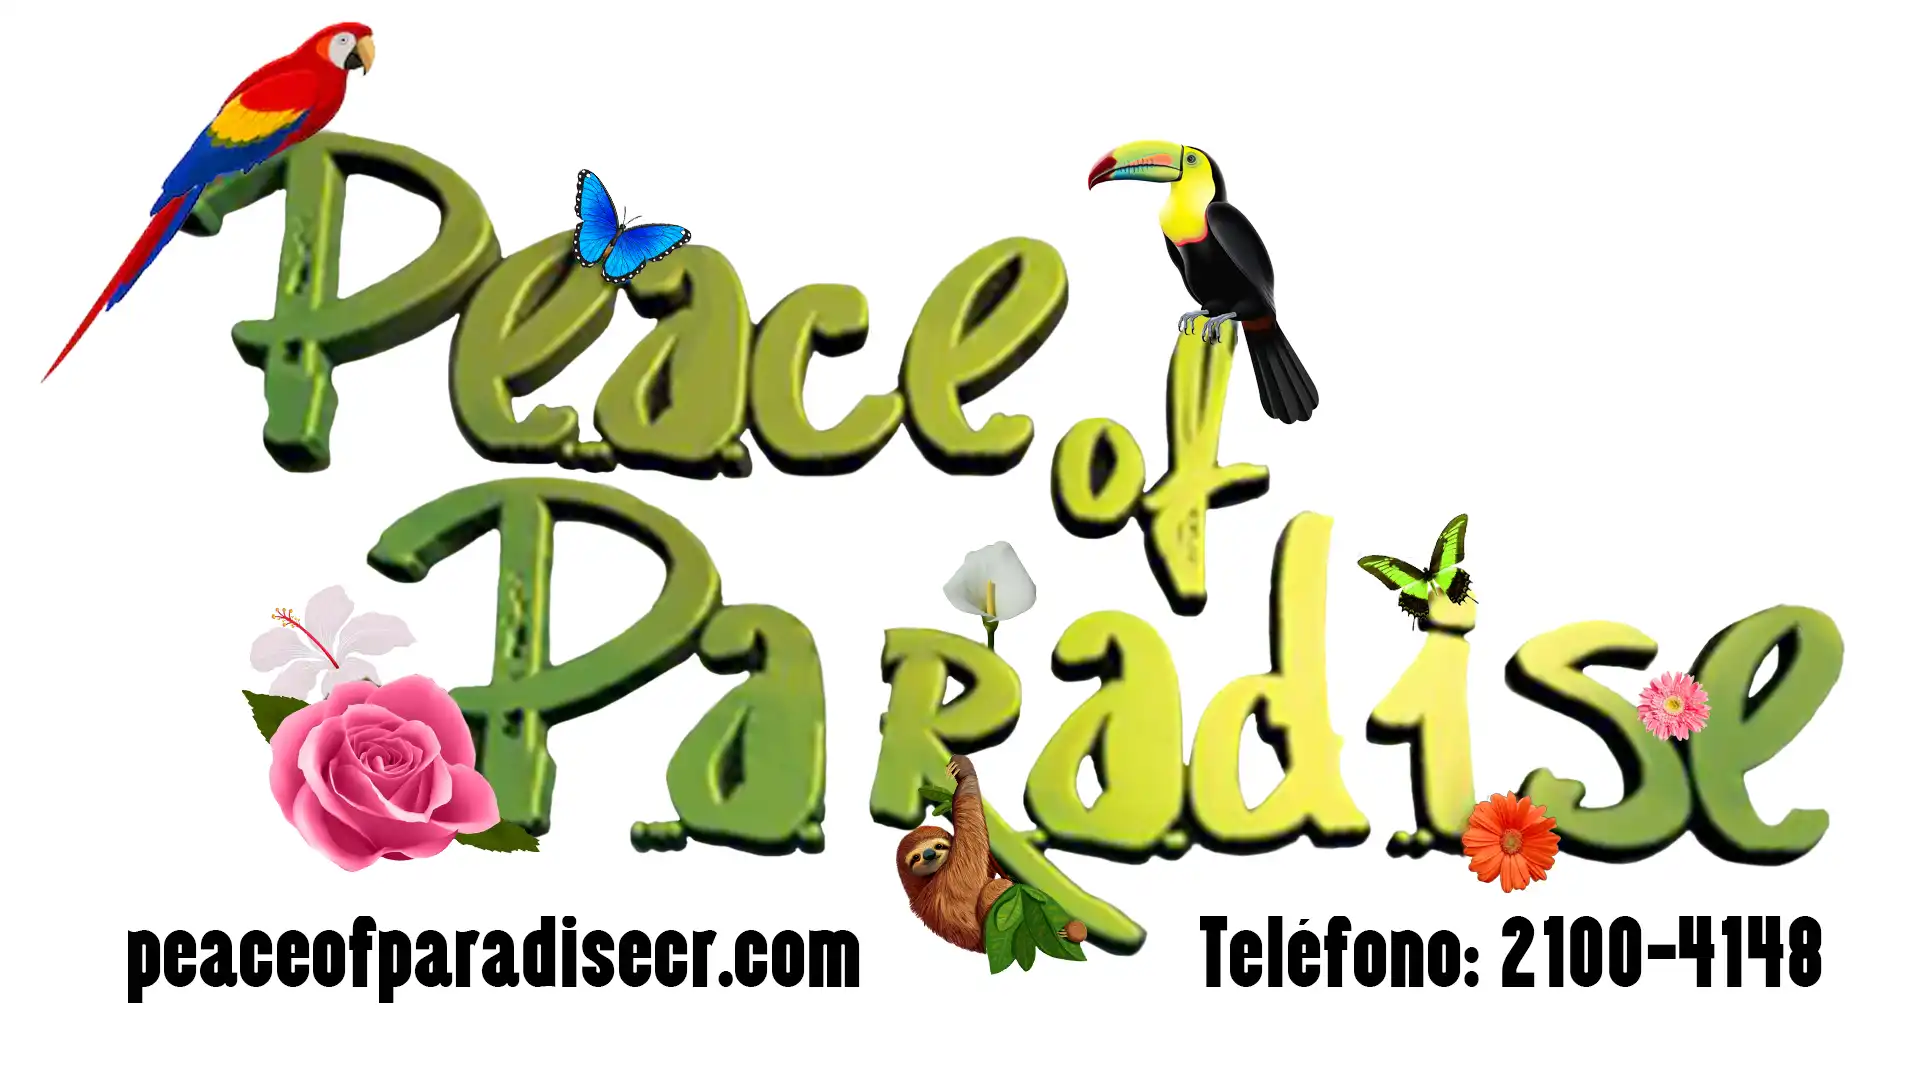 Peace of paradise LOGO New.png_1683666208